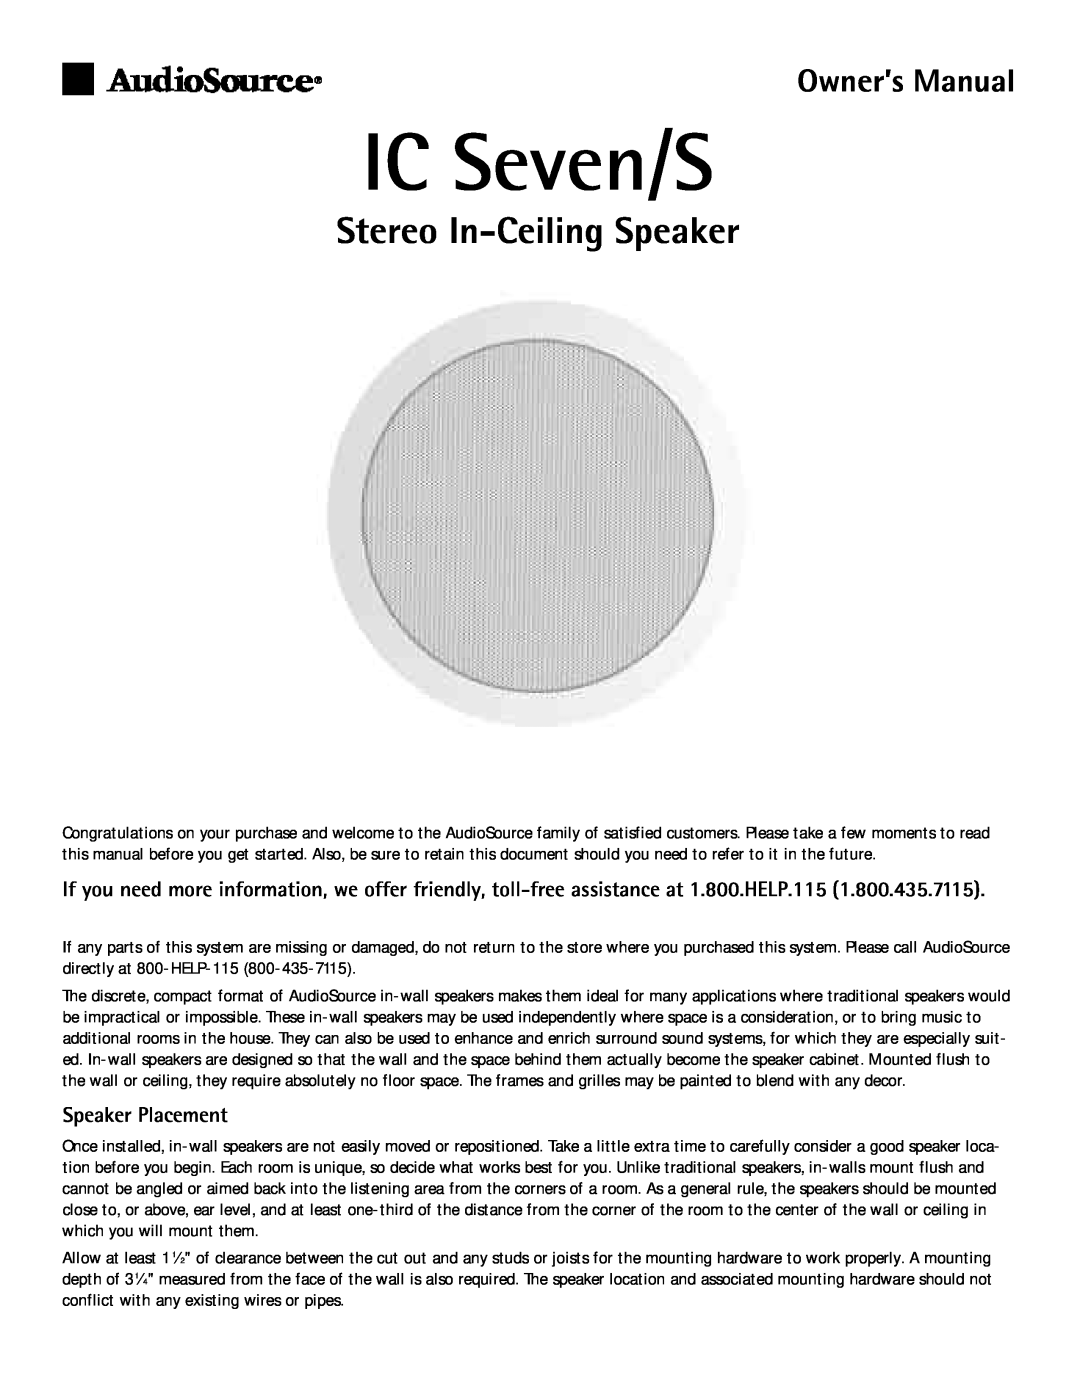 AudioSource owner manual Speaker Placement, IC Seven/S, Stereo In-CeilingSpeaker 